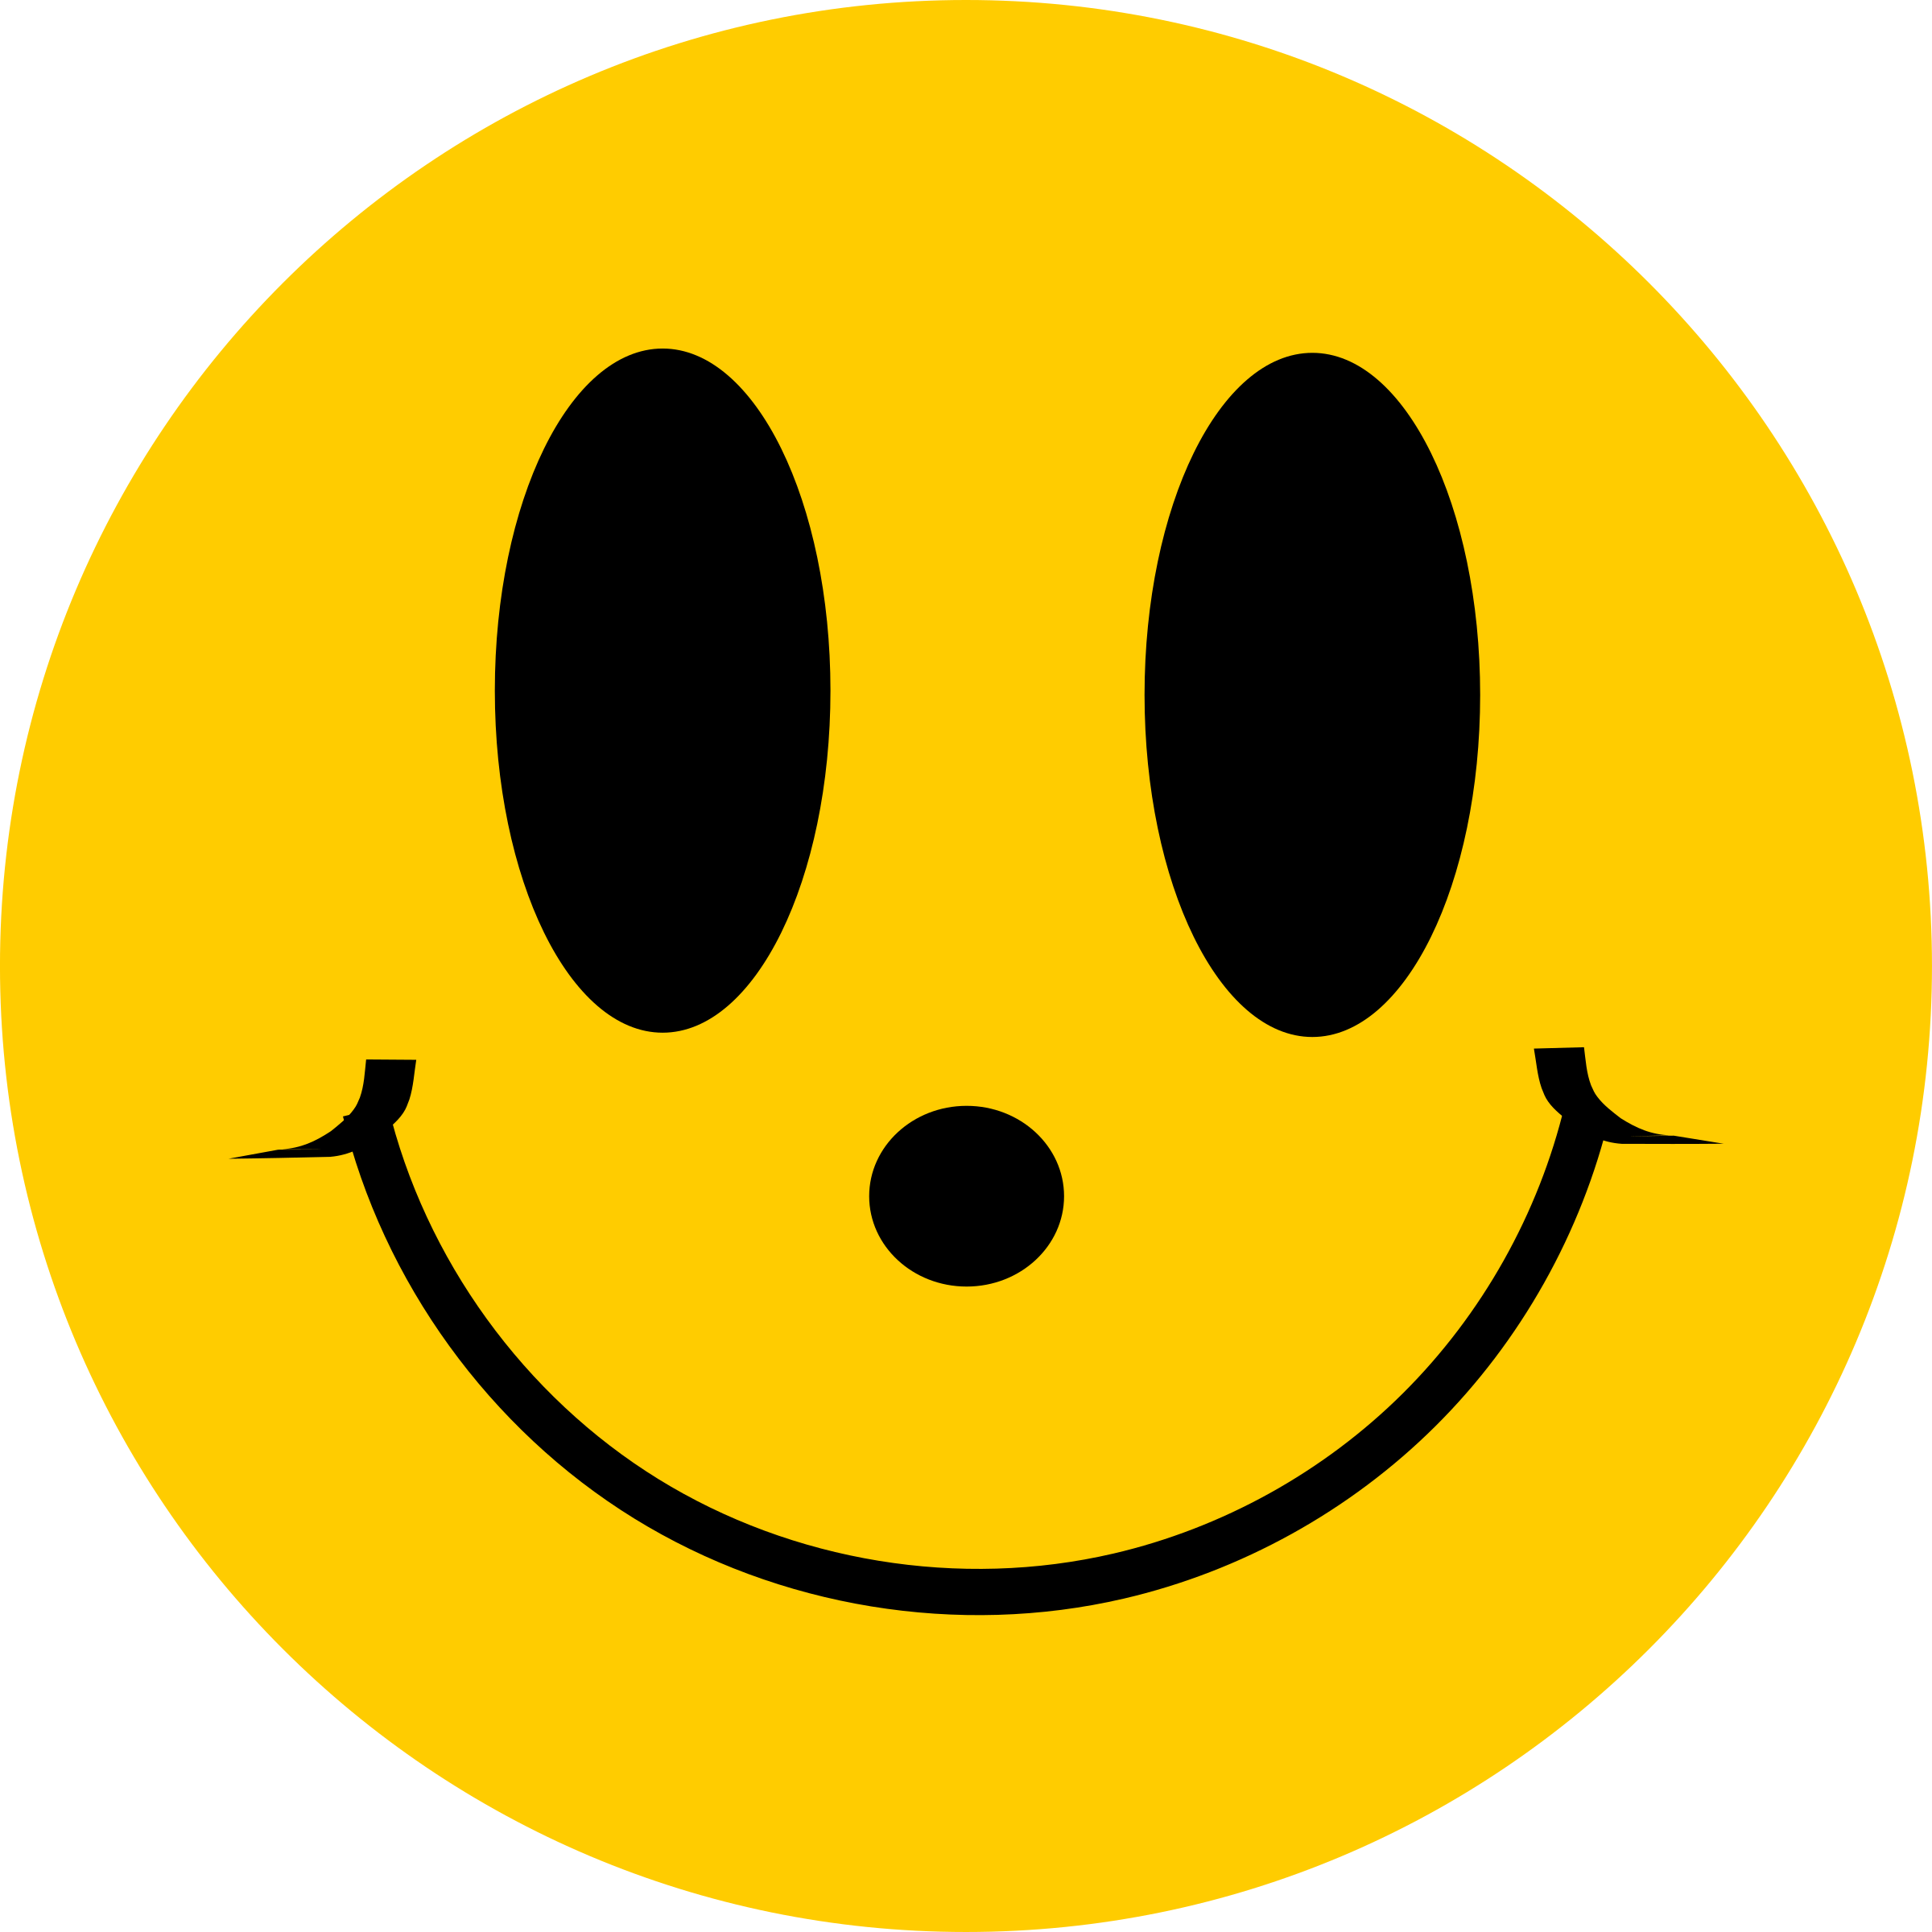 Smiley Looking Happy PNG Image - PurePNG | Free transparent CC0 PNG ...